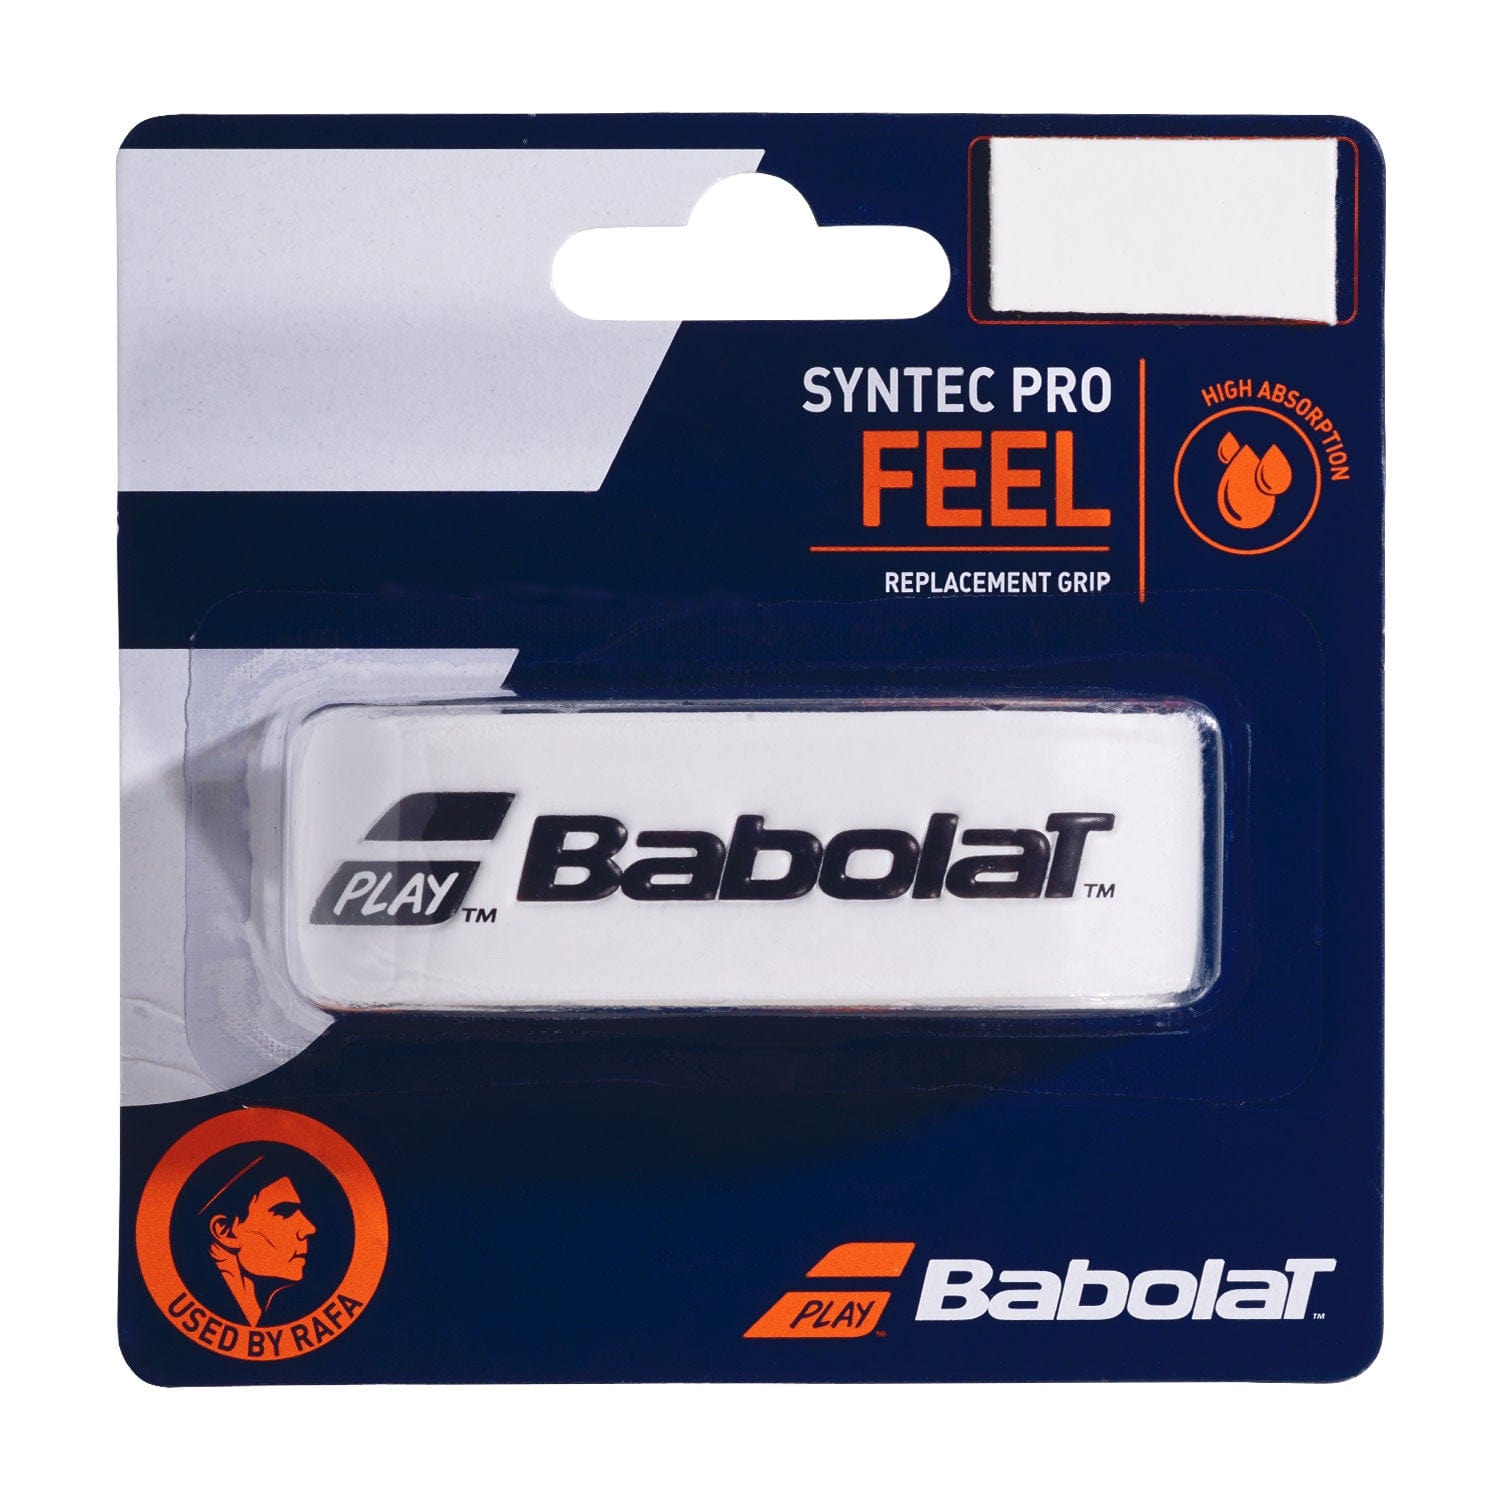 Babolat Syntec Pro Replacement Grip (1x).